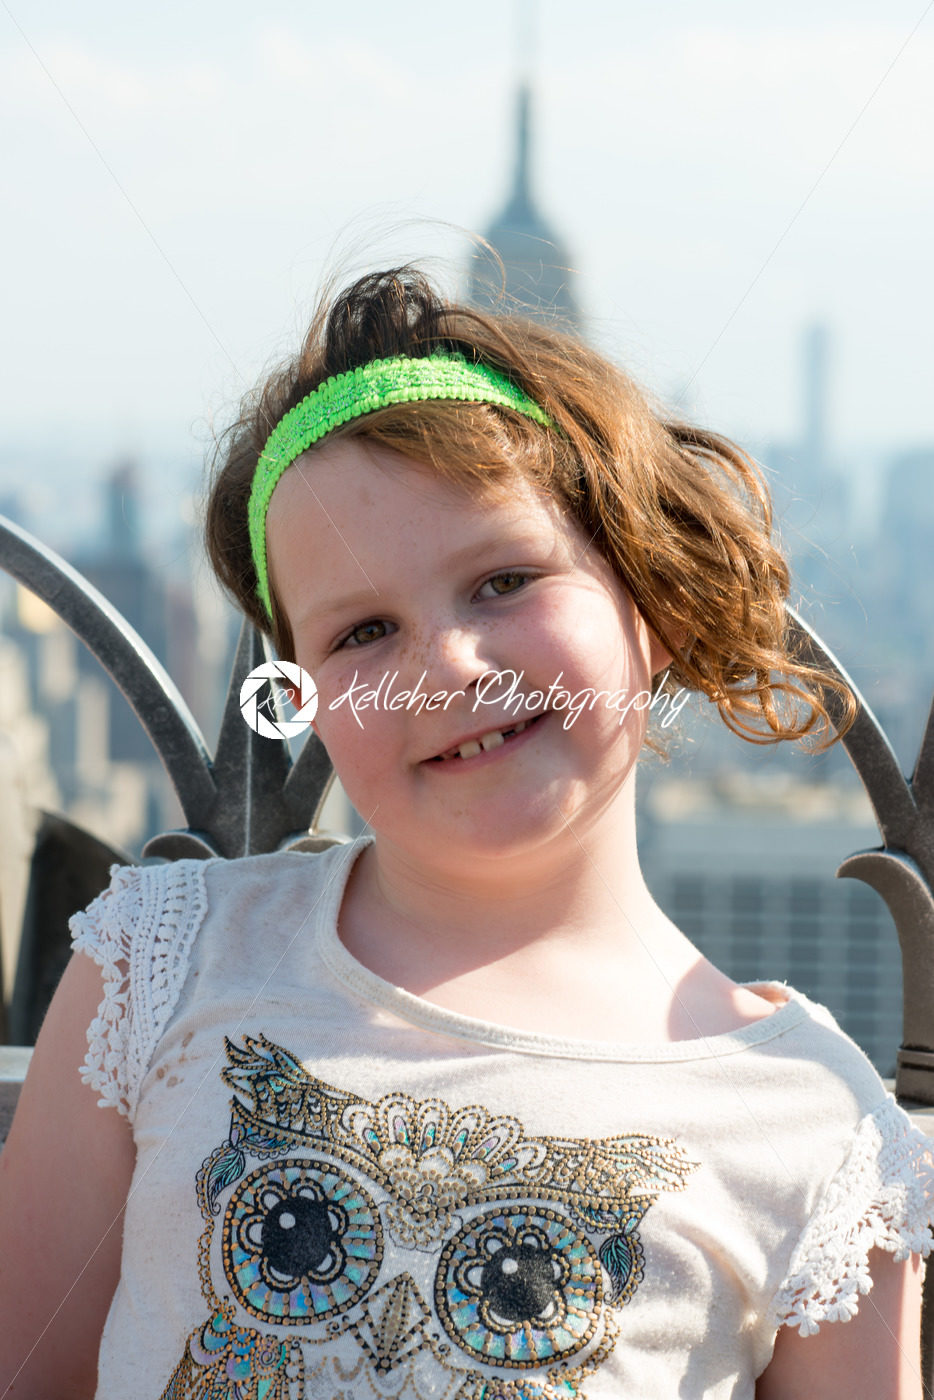 Beautiful young girl on observation deck overlooking the lower Manhattan New York City skyline - Kelleher Photography Store